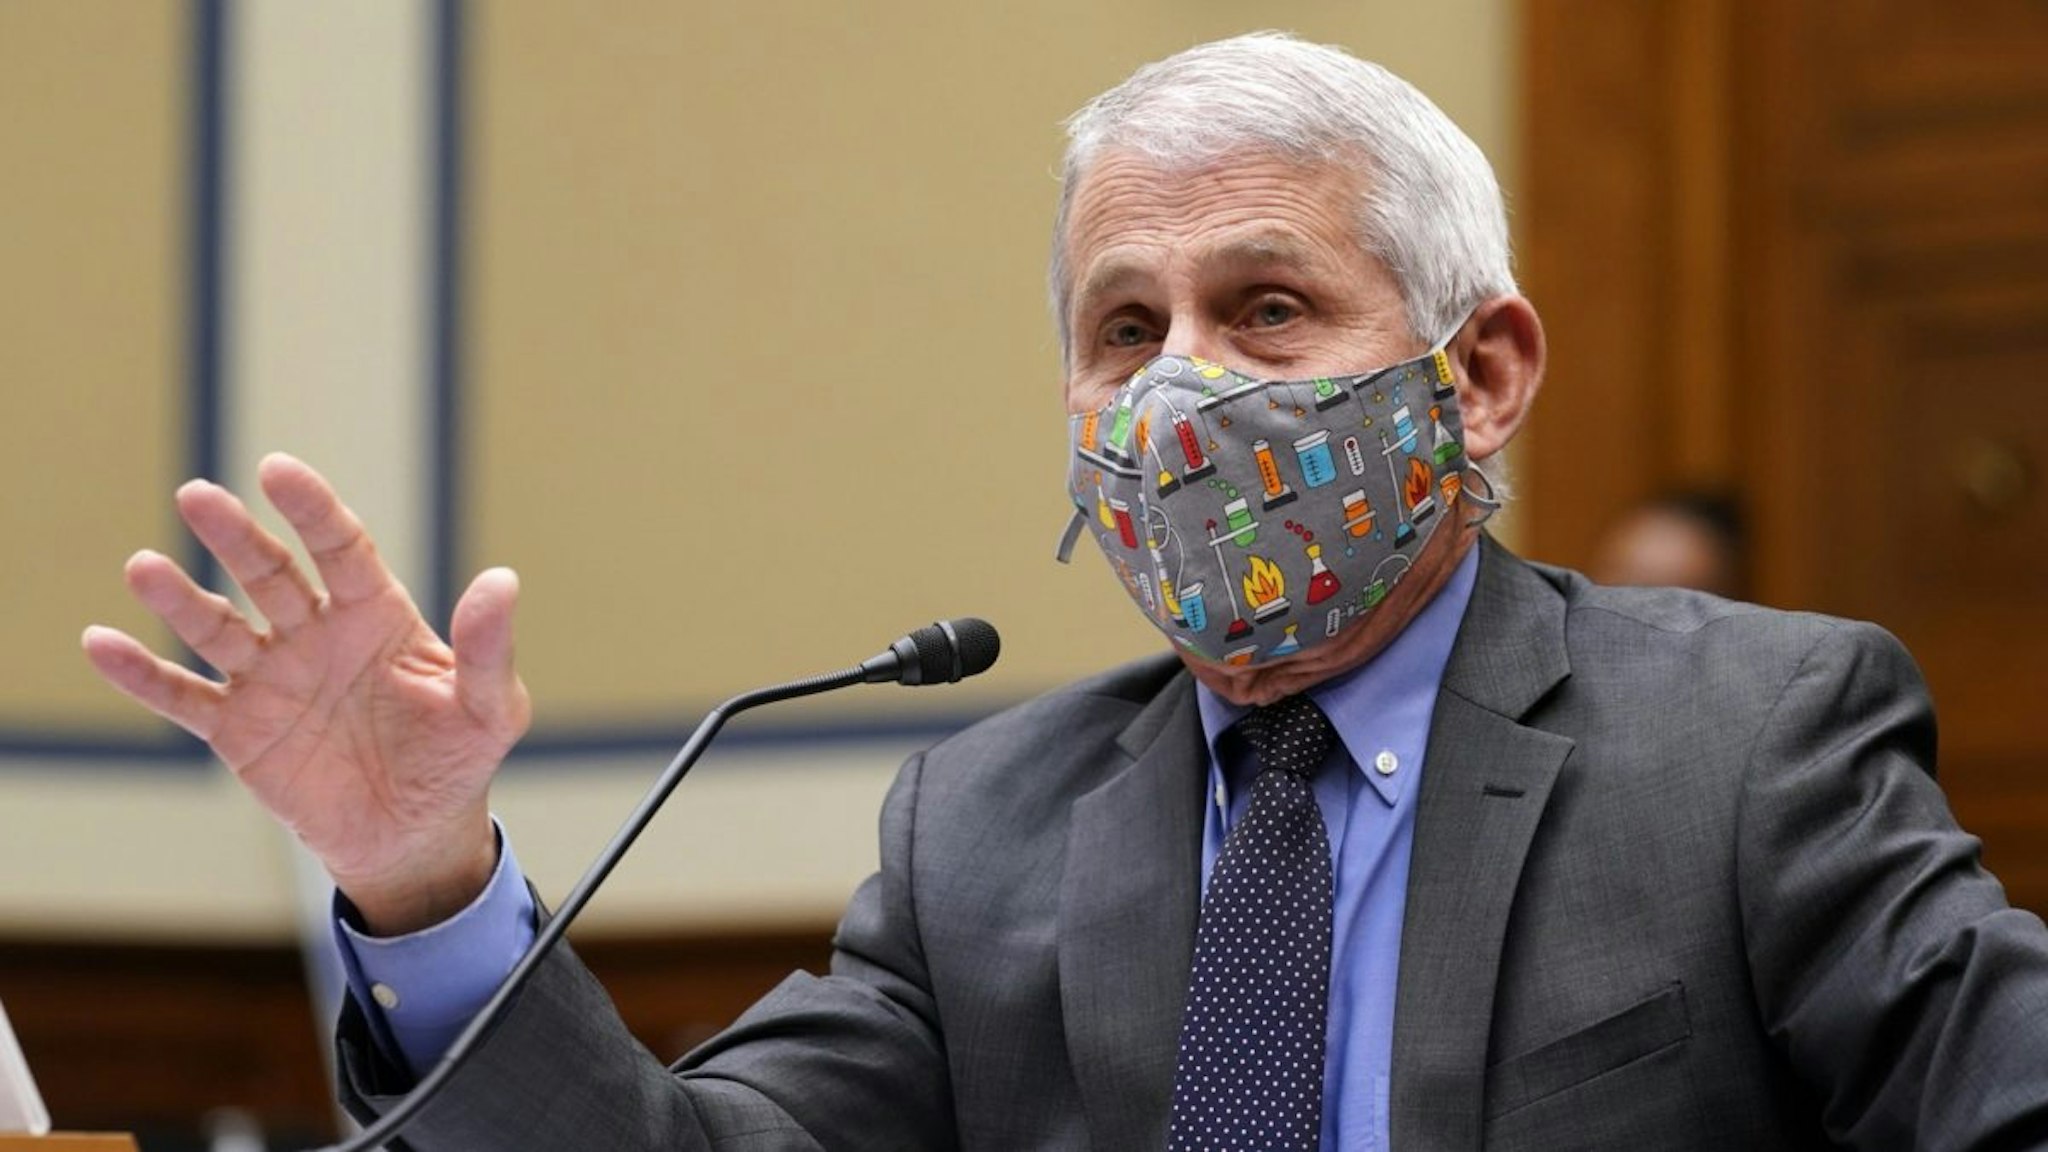 Anthony Fauci, director of the National Institute of Allergy and Infectious Diseases, speaks during a Select Subcommittee On Coronavirus Crisis hearing in Washington, D.C., U.S., on Thursday, April 15, 2021.